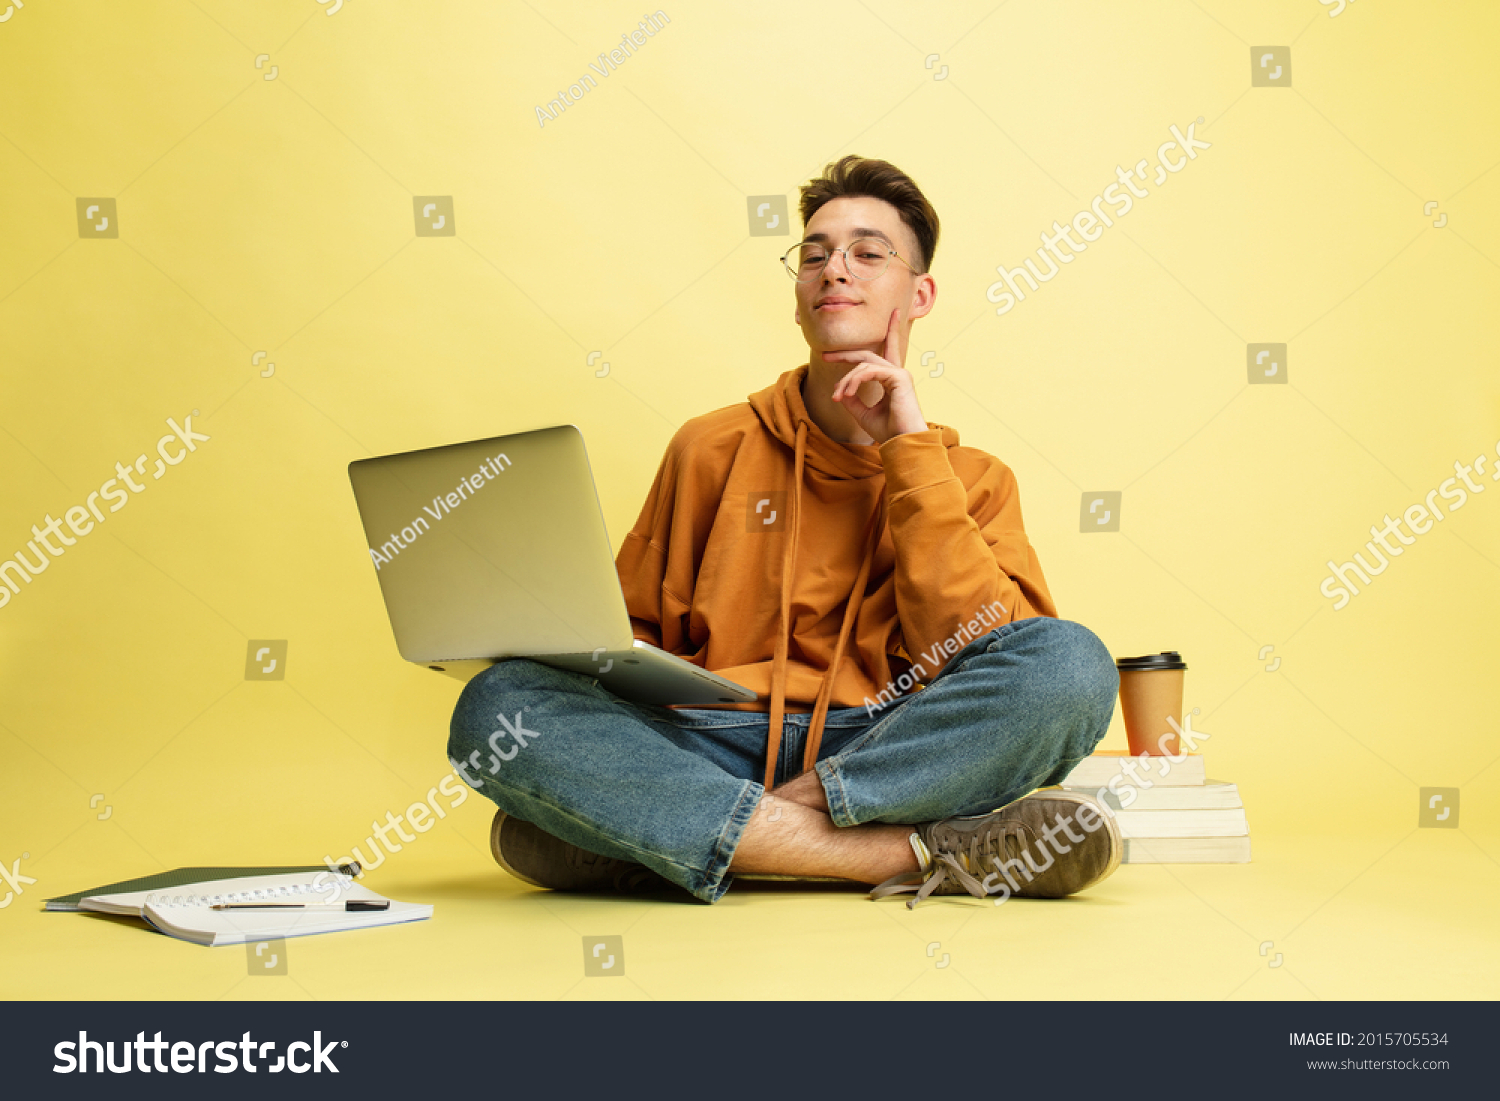 Studying, doing homework. One young smiling caucasian man, student in glasses sits on floor with laptop isolated on yellow studio background. Education, studying and student life concept. #2015705534